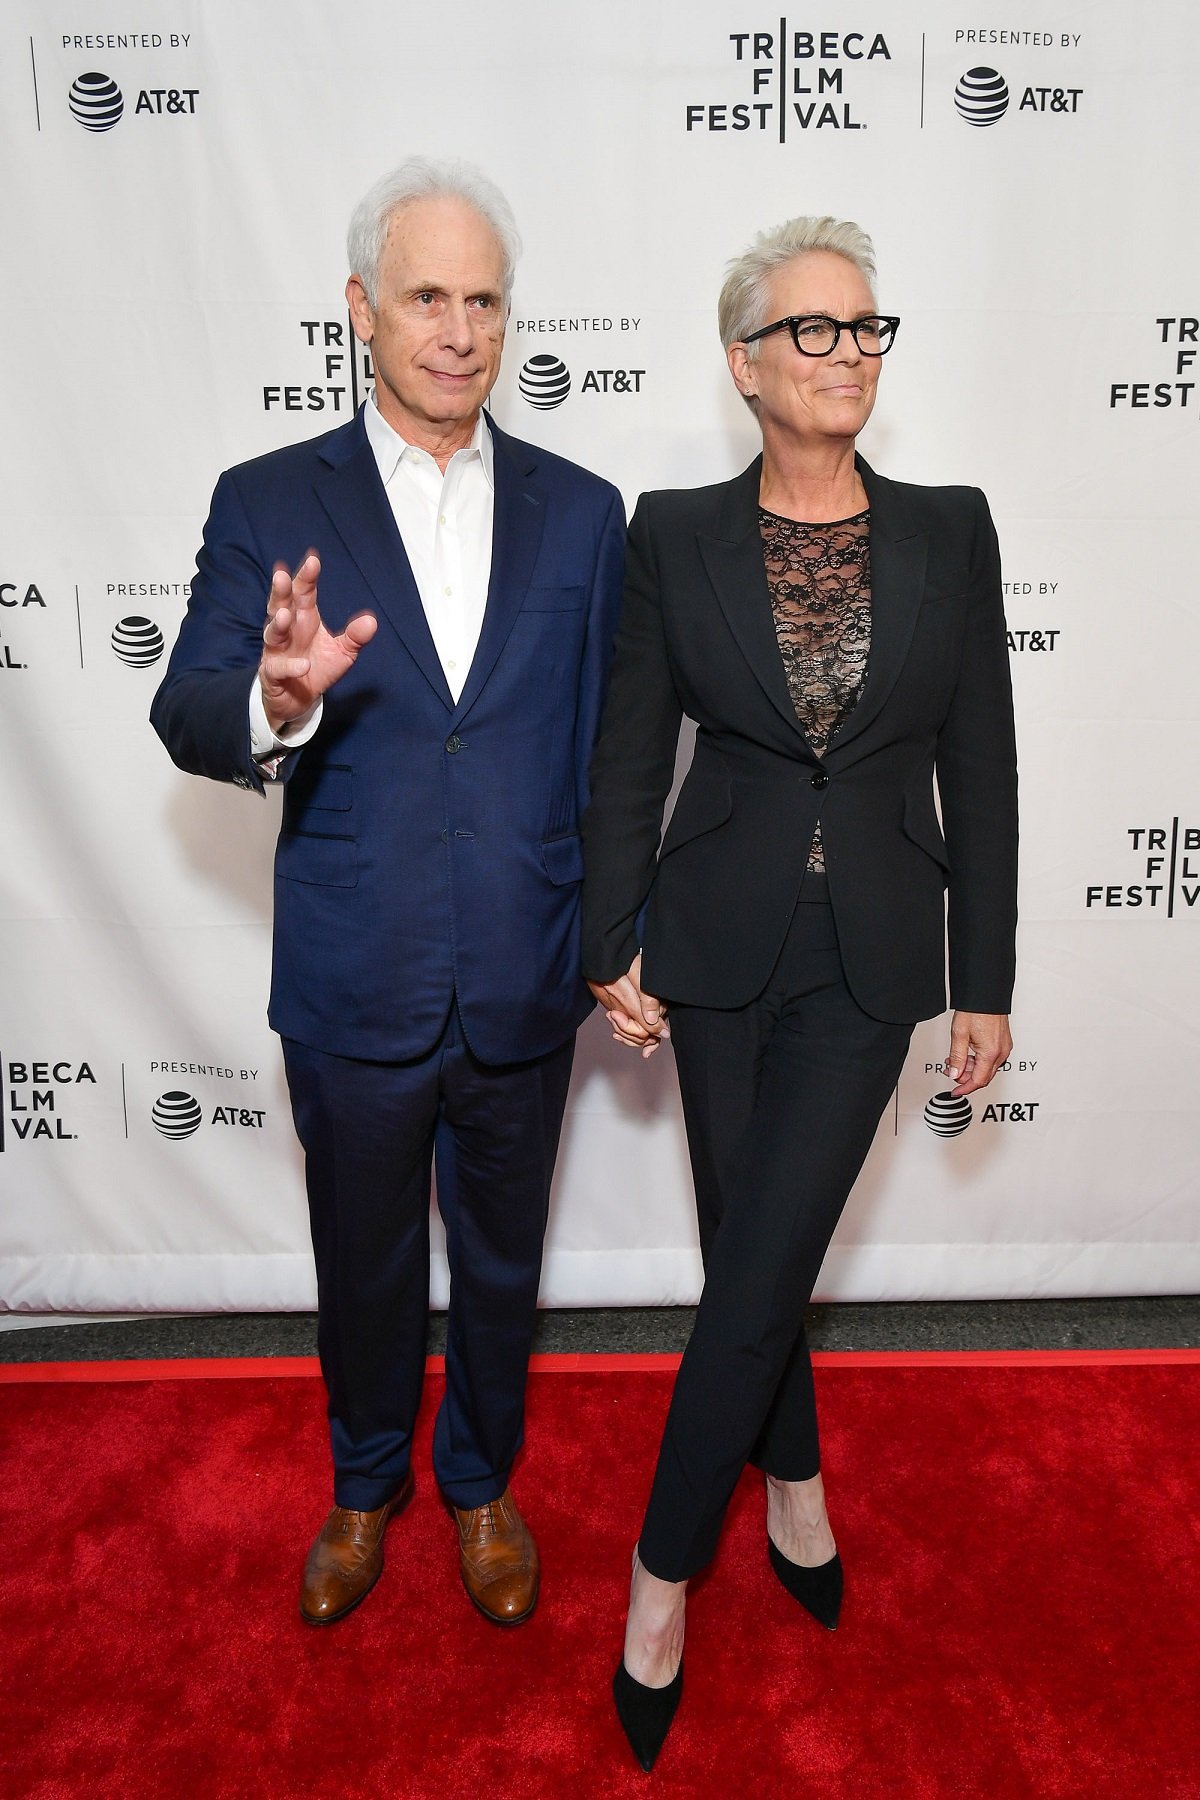 How Much Younger Is Jamie Lee Curtis Than Her Husband Christopher Guest?